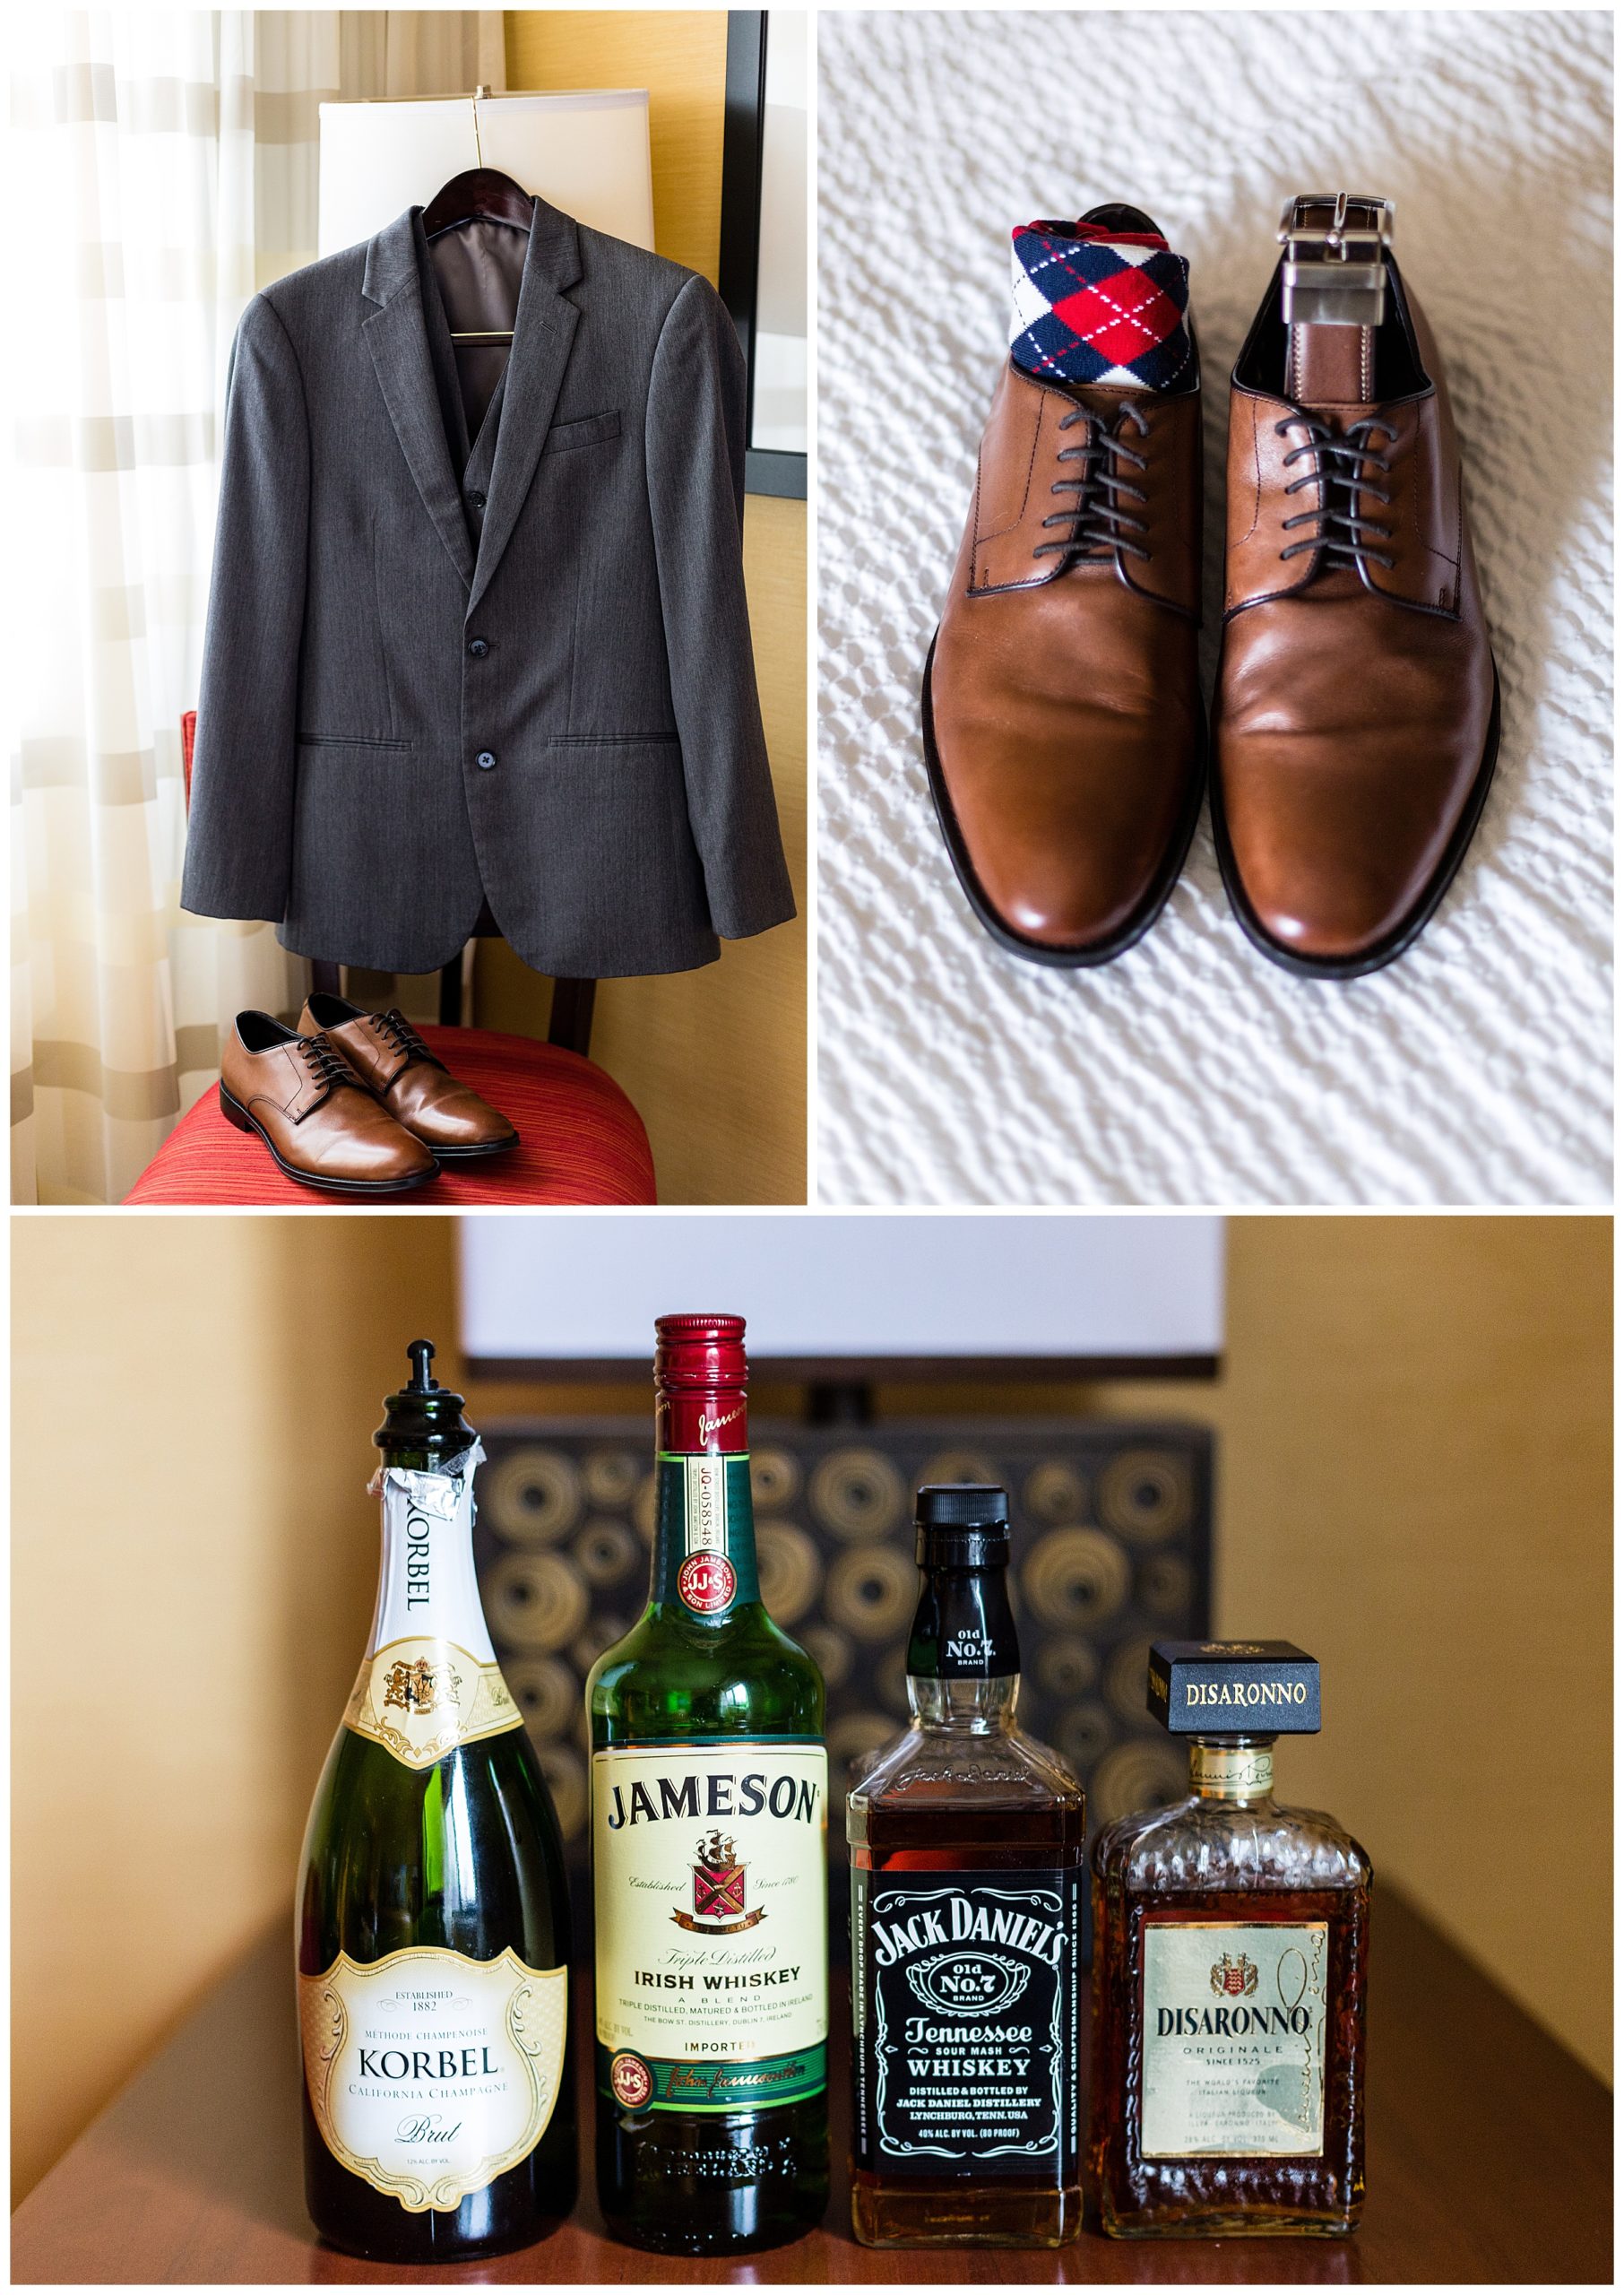 Groom wedding accessories detail collage with jacket, shoes, and whiskey and champagne bottles